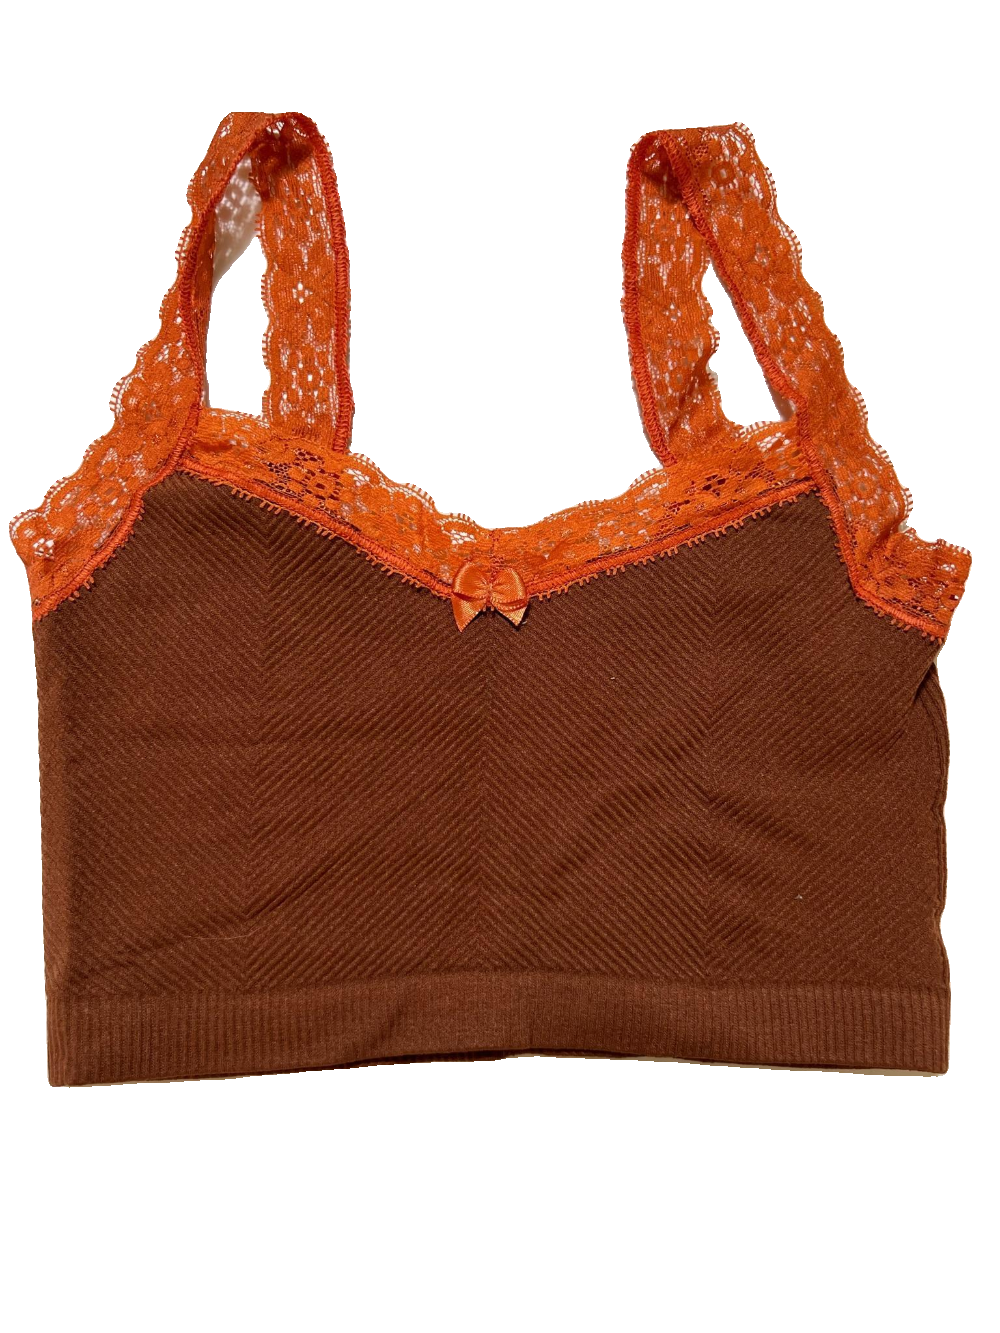 Urban Outfitters- Orange Crop Top